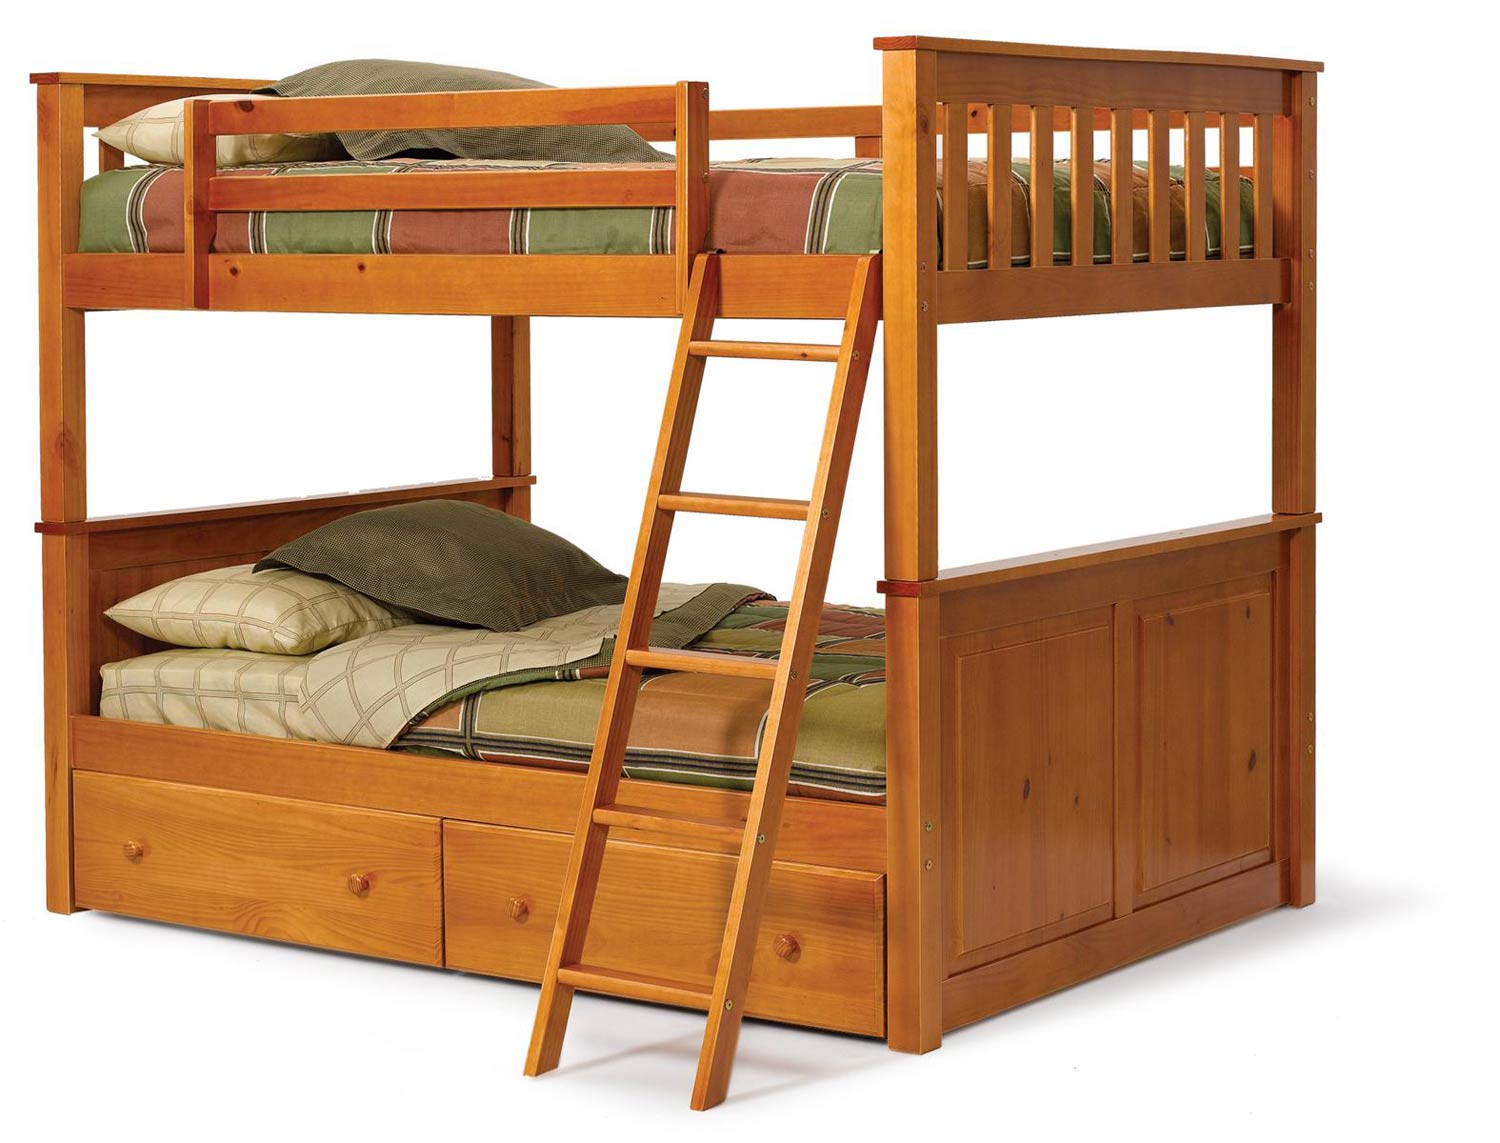 Chelsea Home 3642540-S Full Over Full Mission Panel Bunk Bed with Underbed Storage - Honey